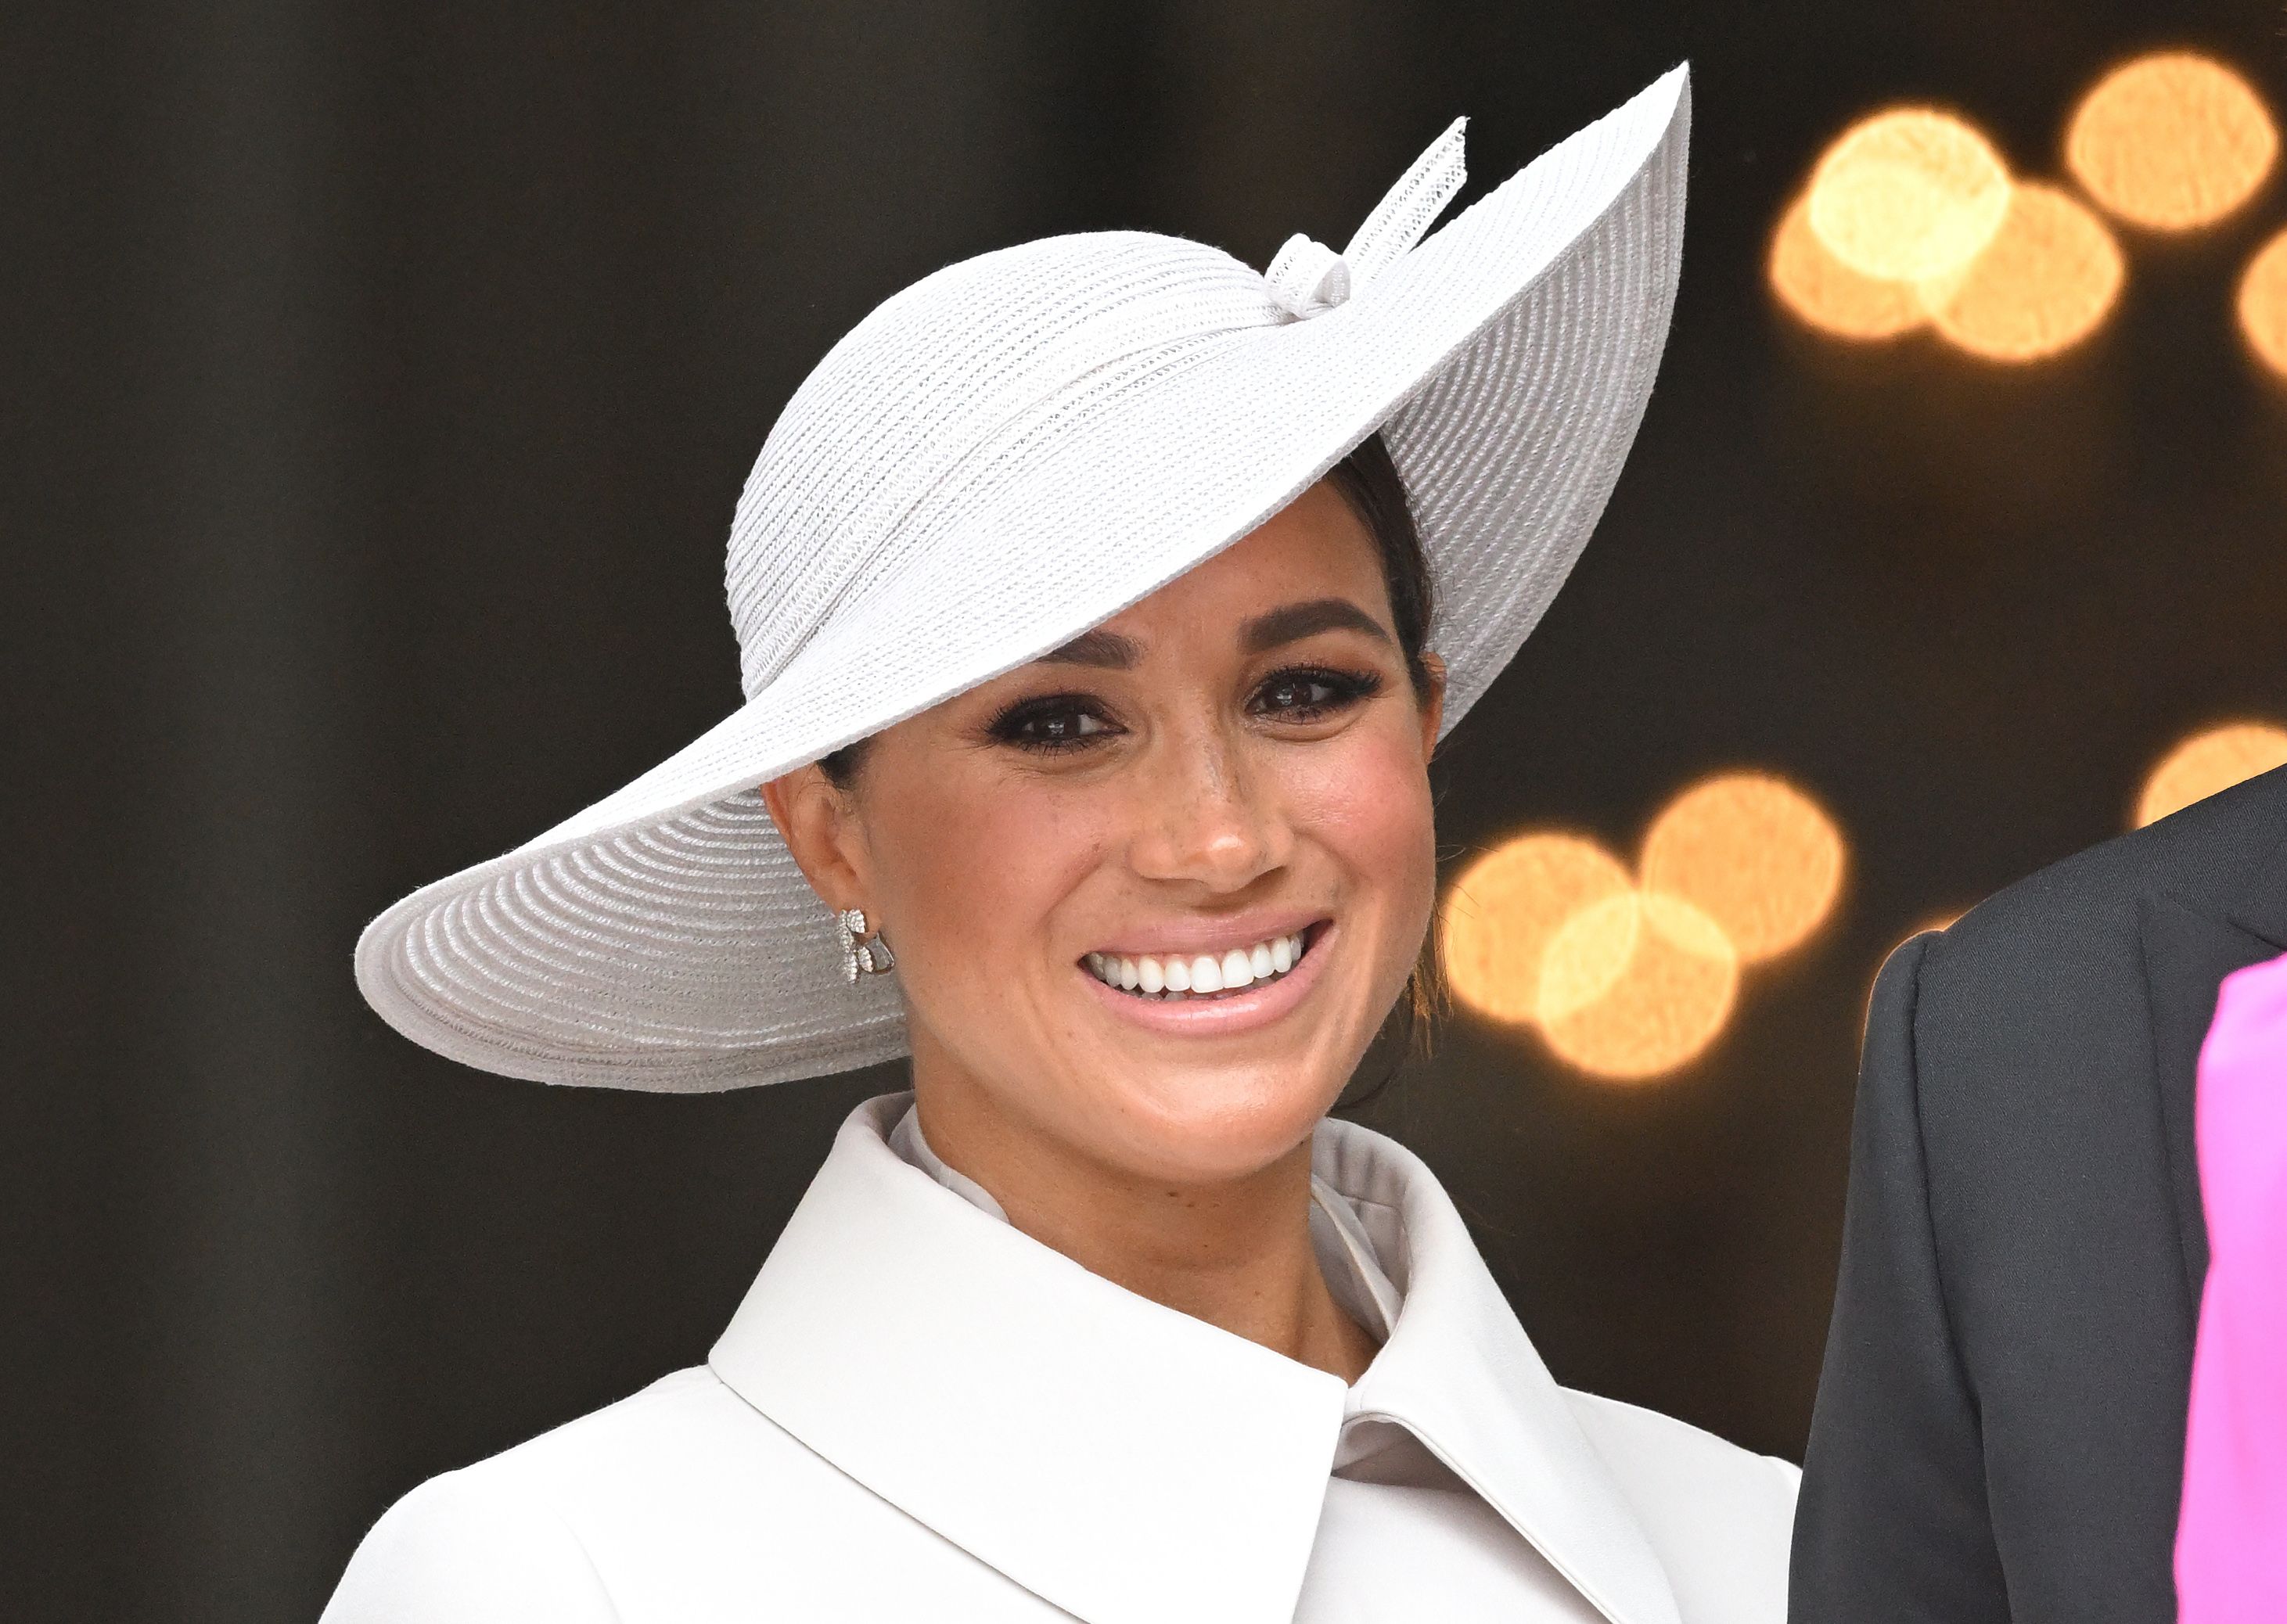 What Meghan Markle Wore - Meghan's Fashion